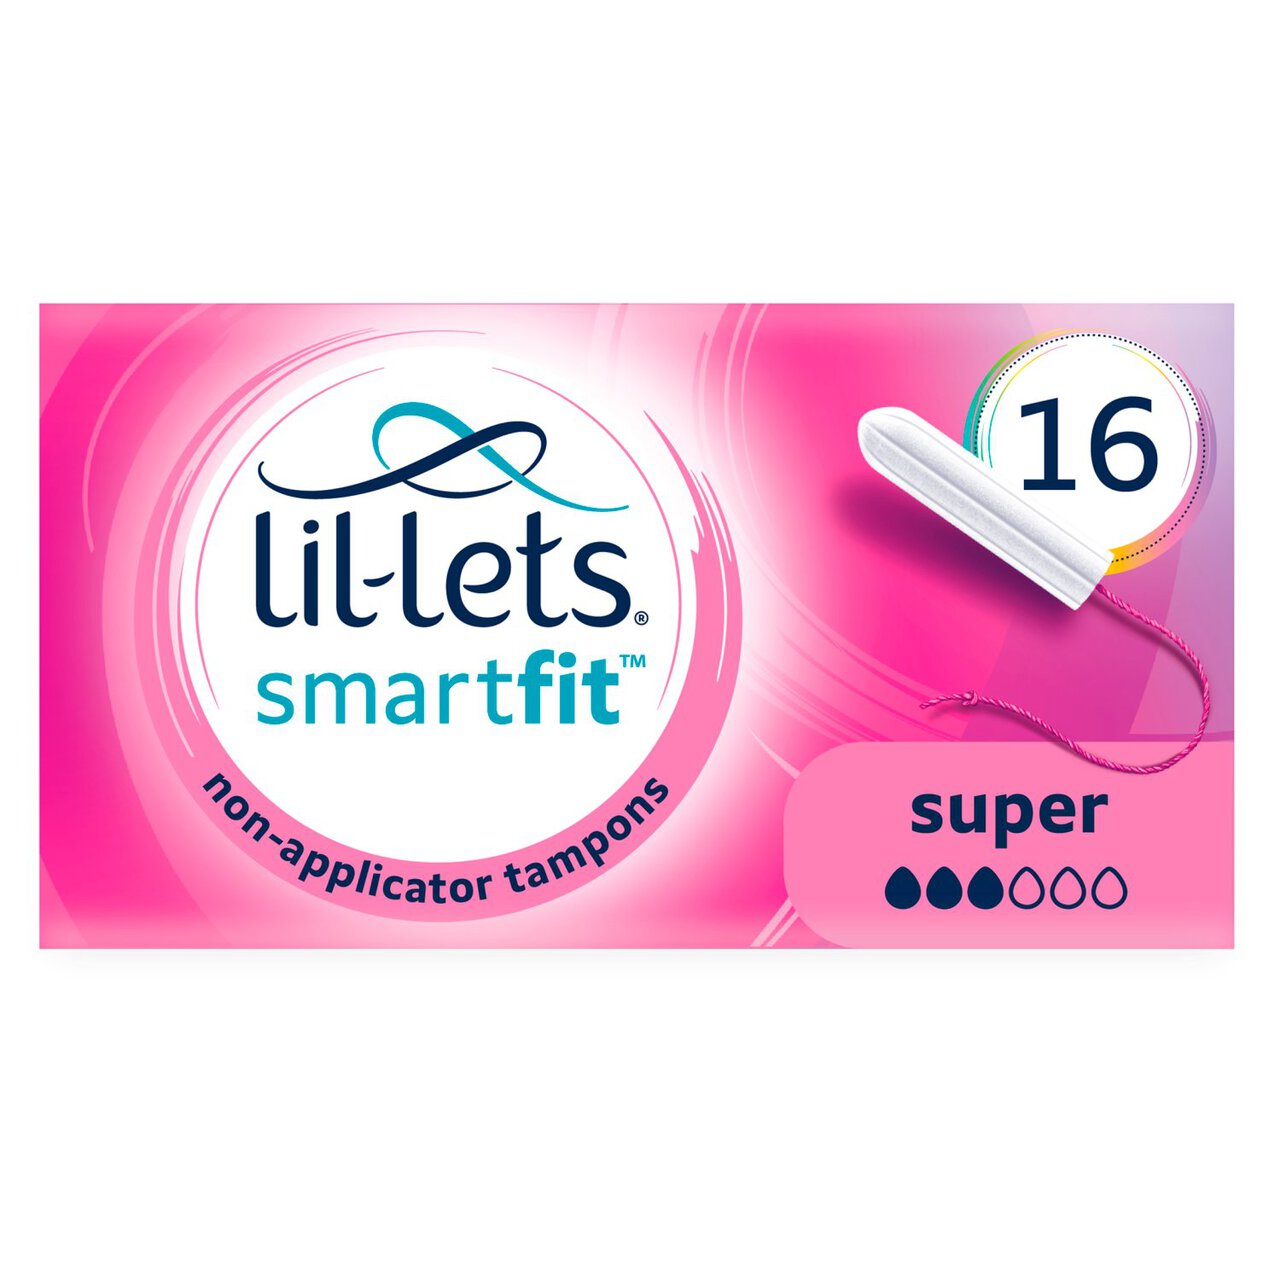 Lil-Lets Super Non-Applicator Tampons 16 per pack